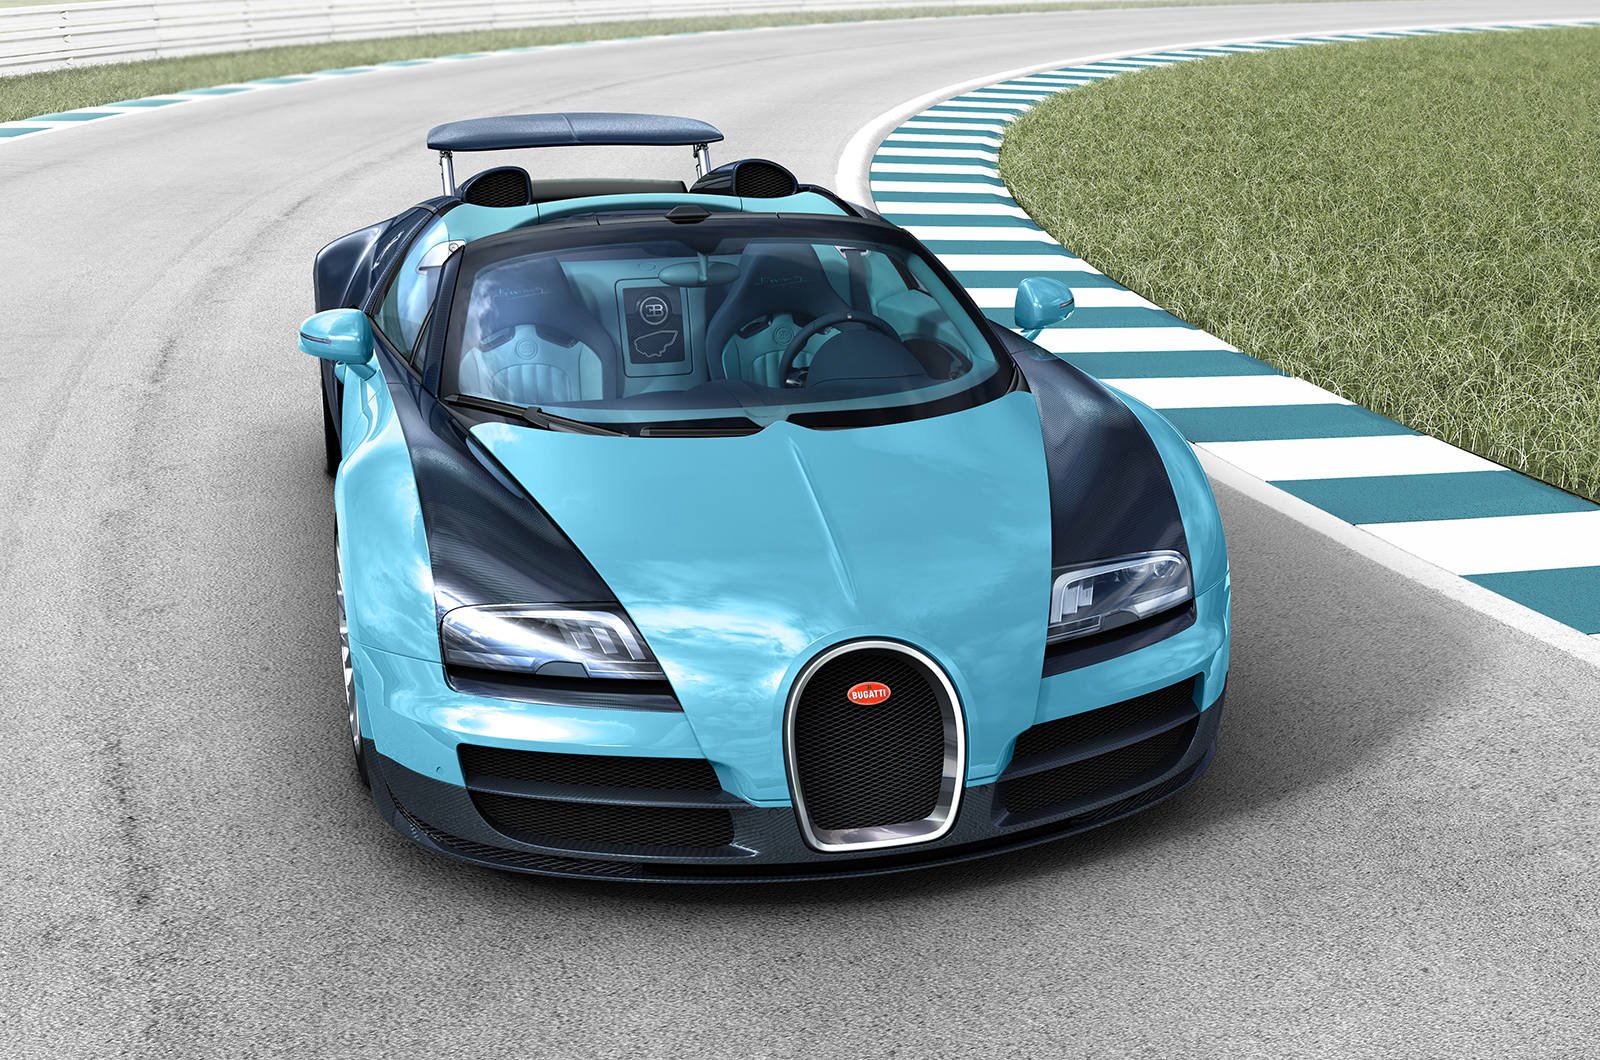 Six new Bugatti Veyron special editions to be created | Autocar